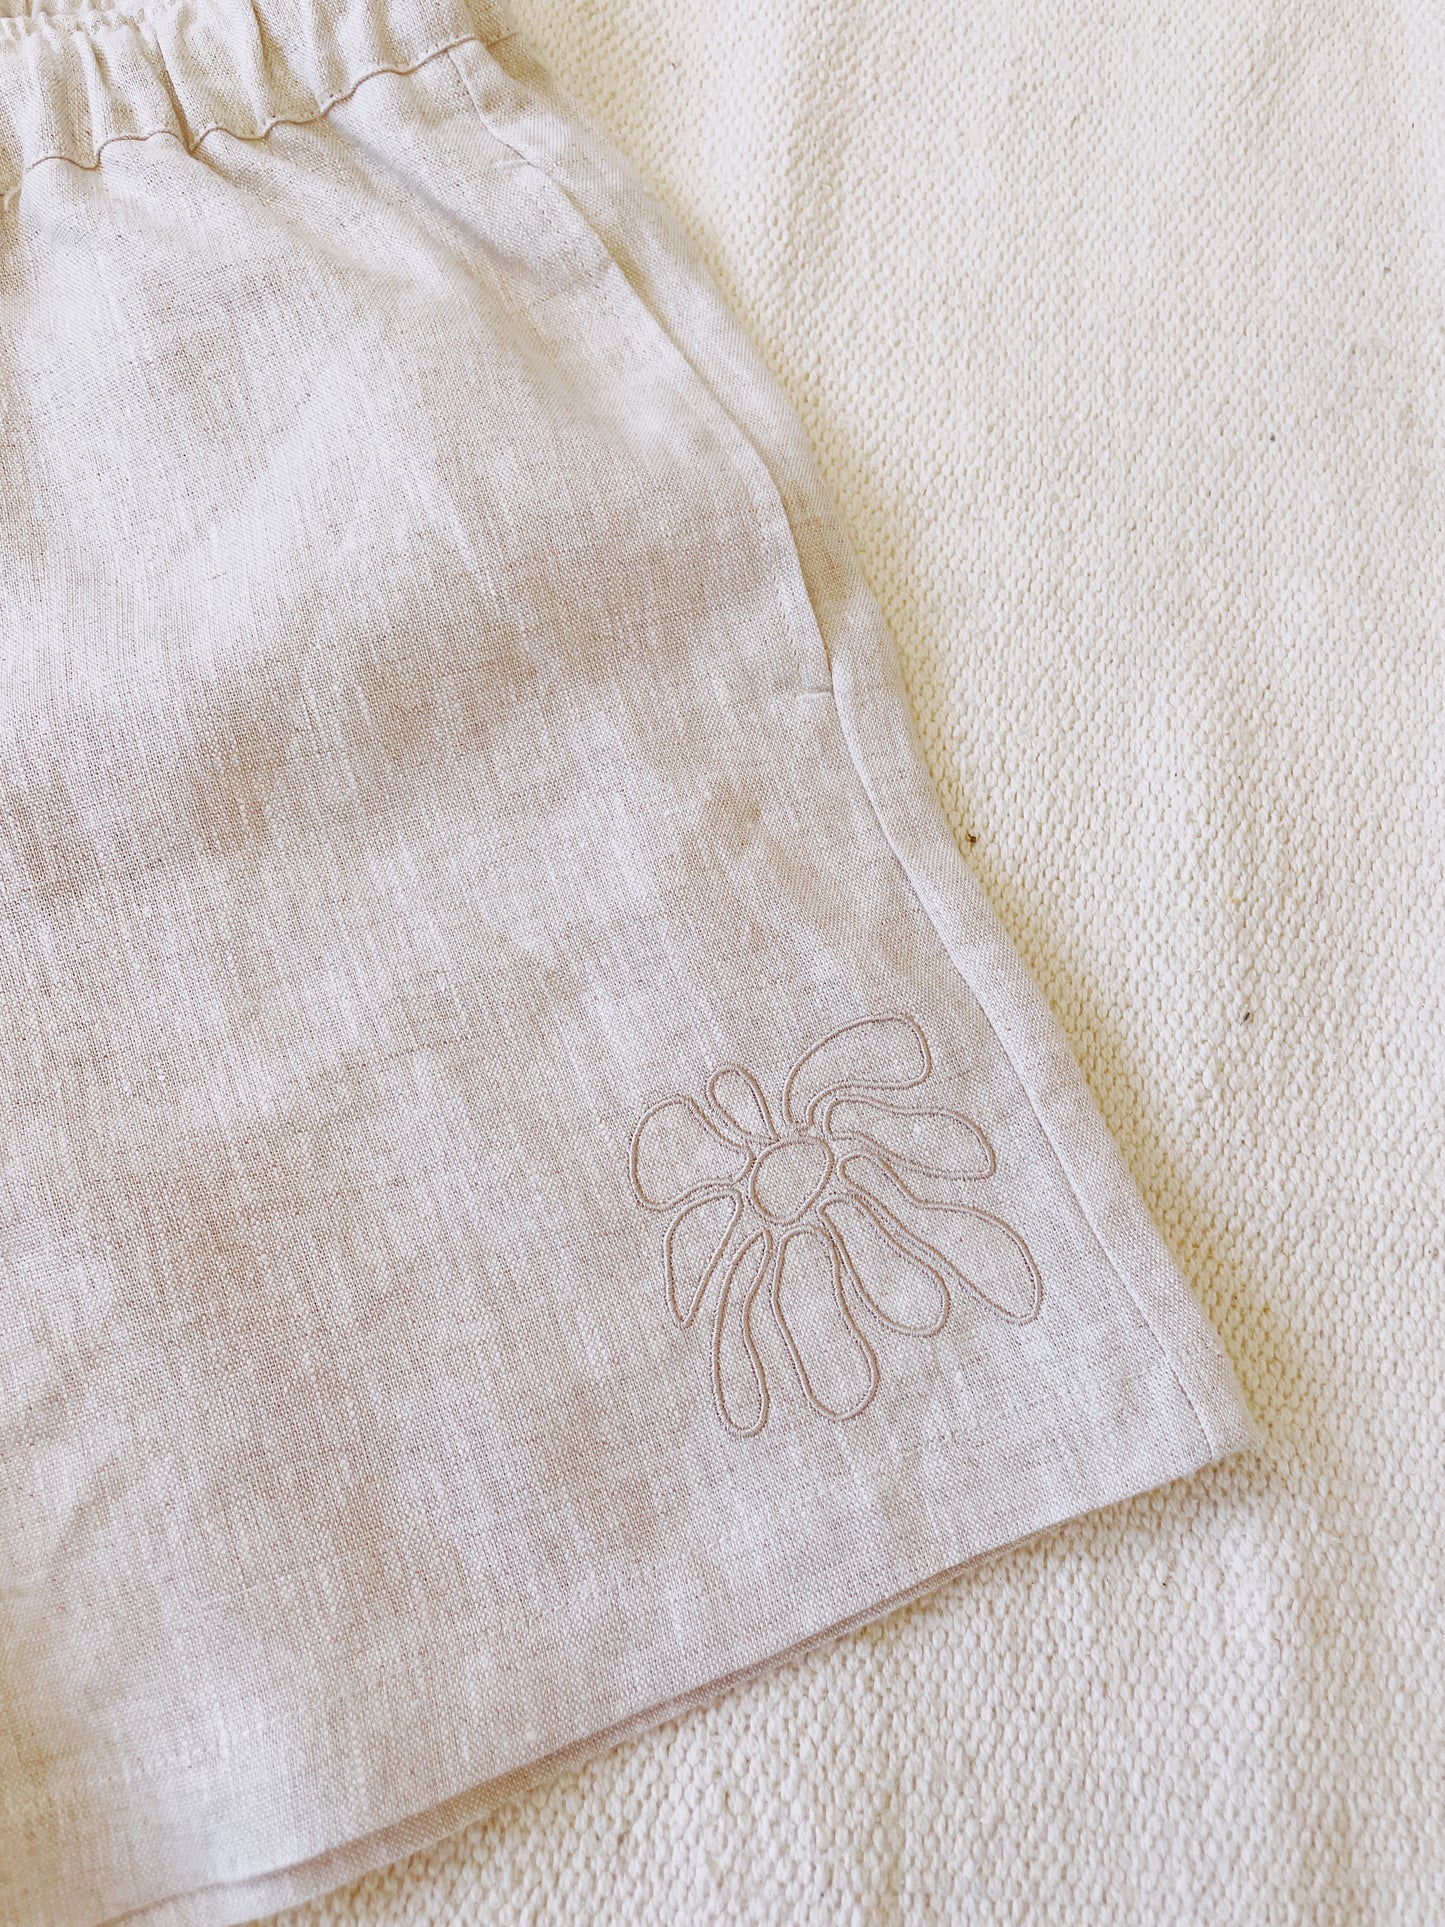 FLWRS Embroidered Linen Shorts - Natural